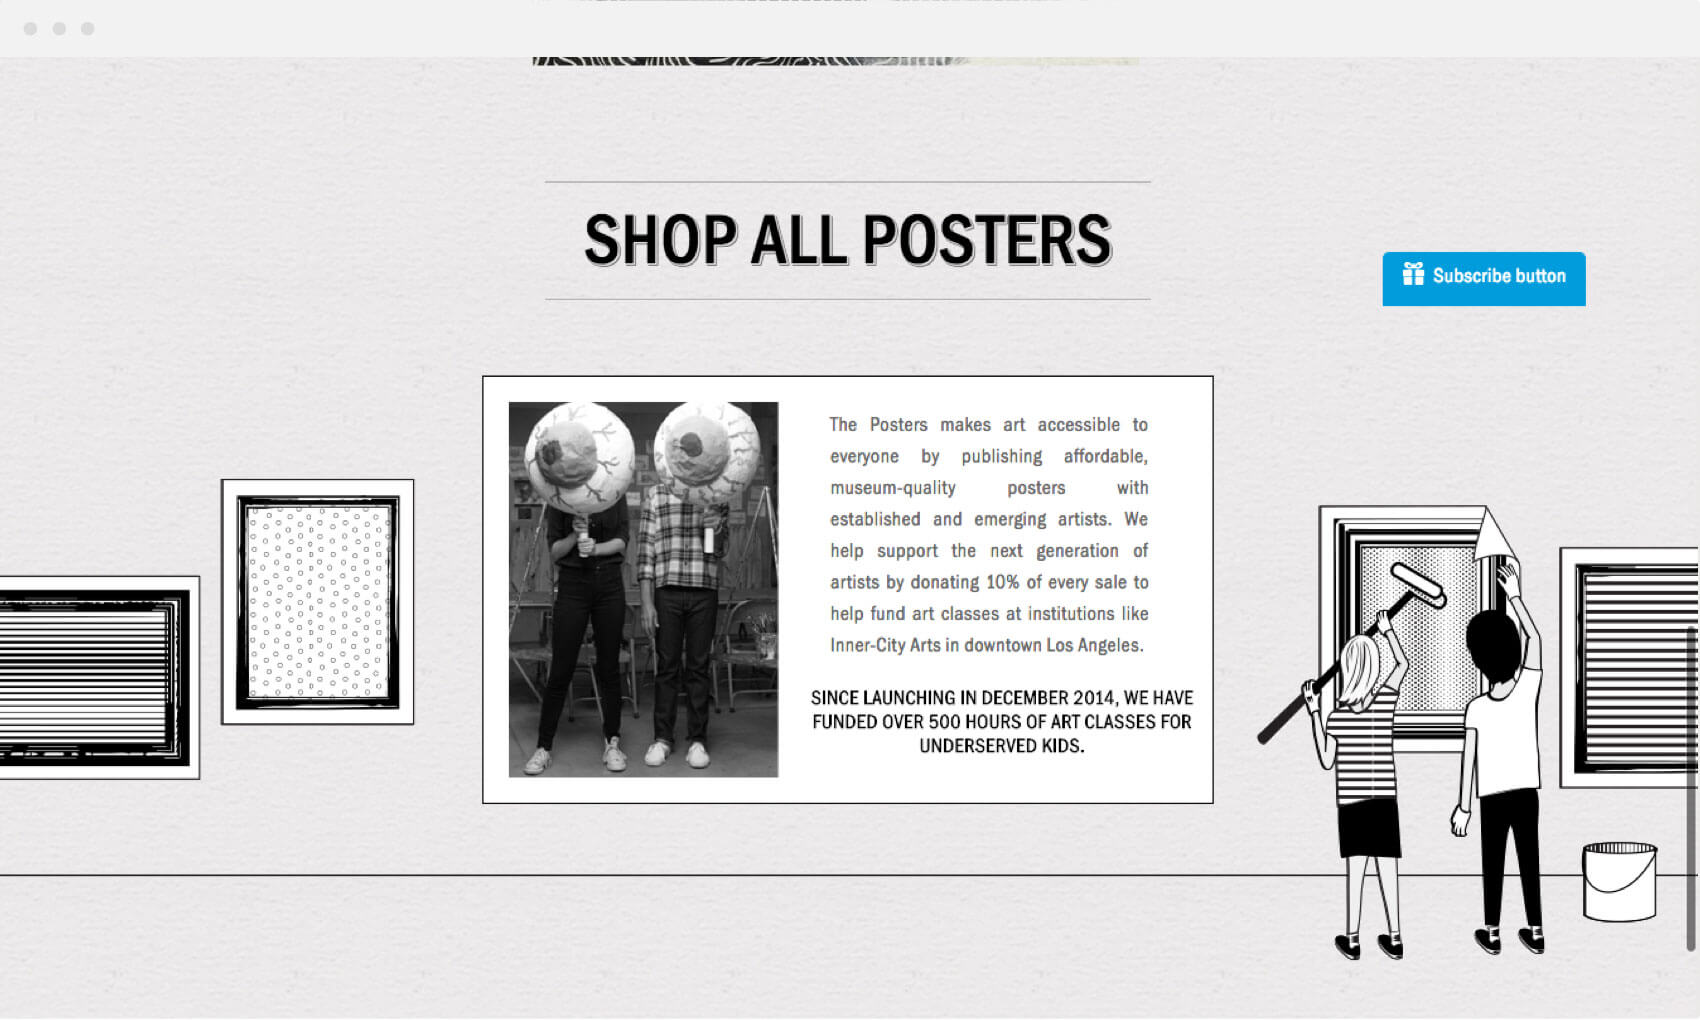 The posters website. Shop page.